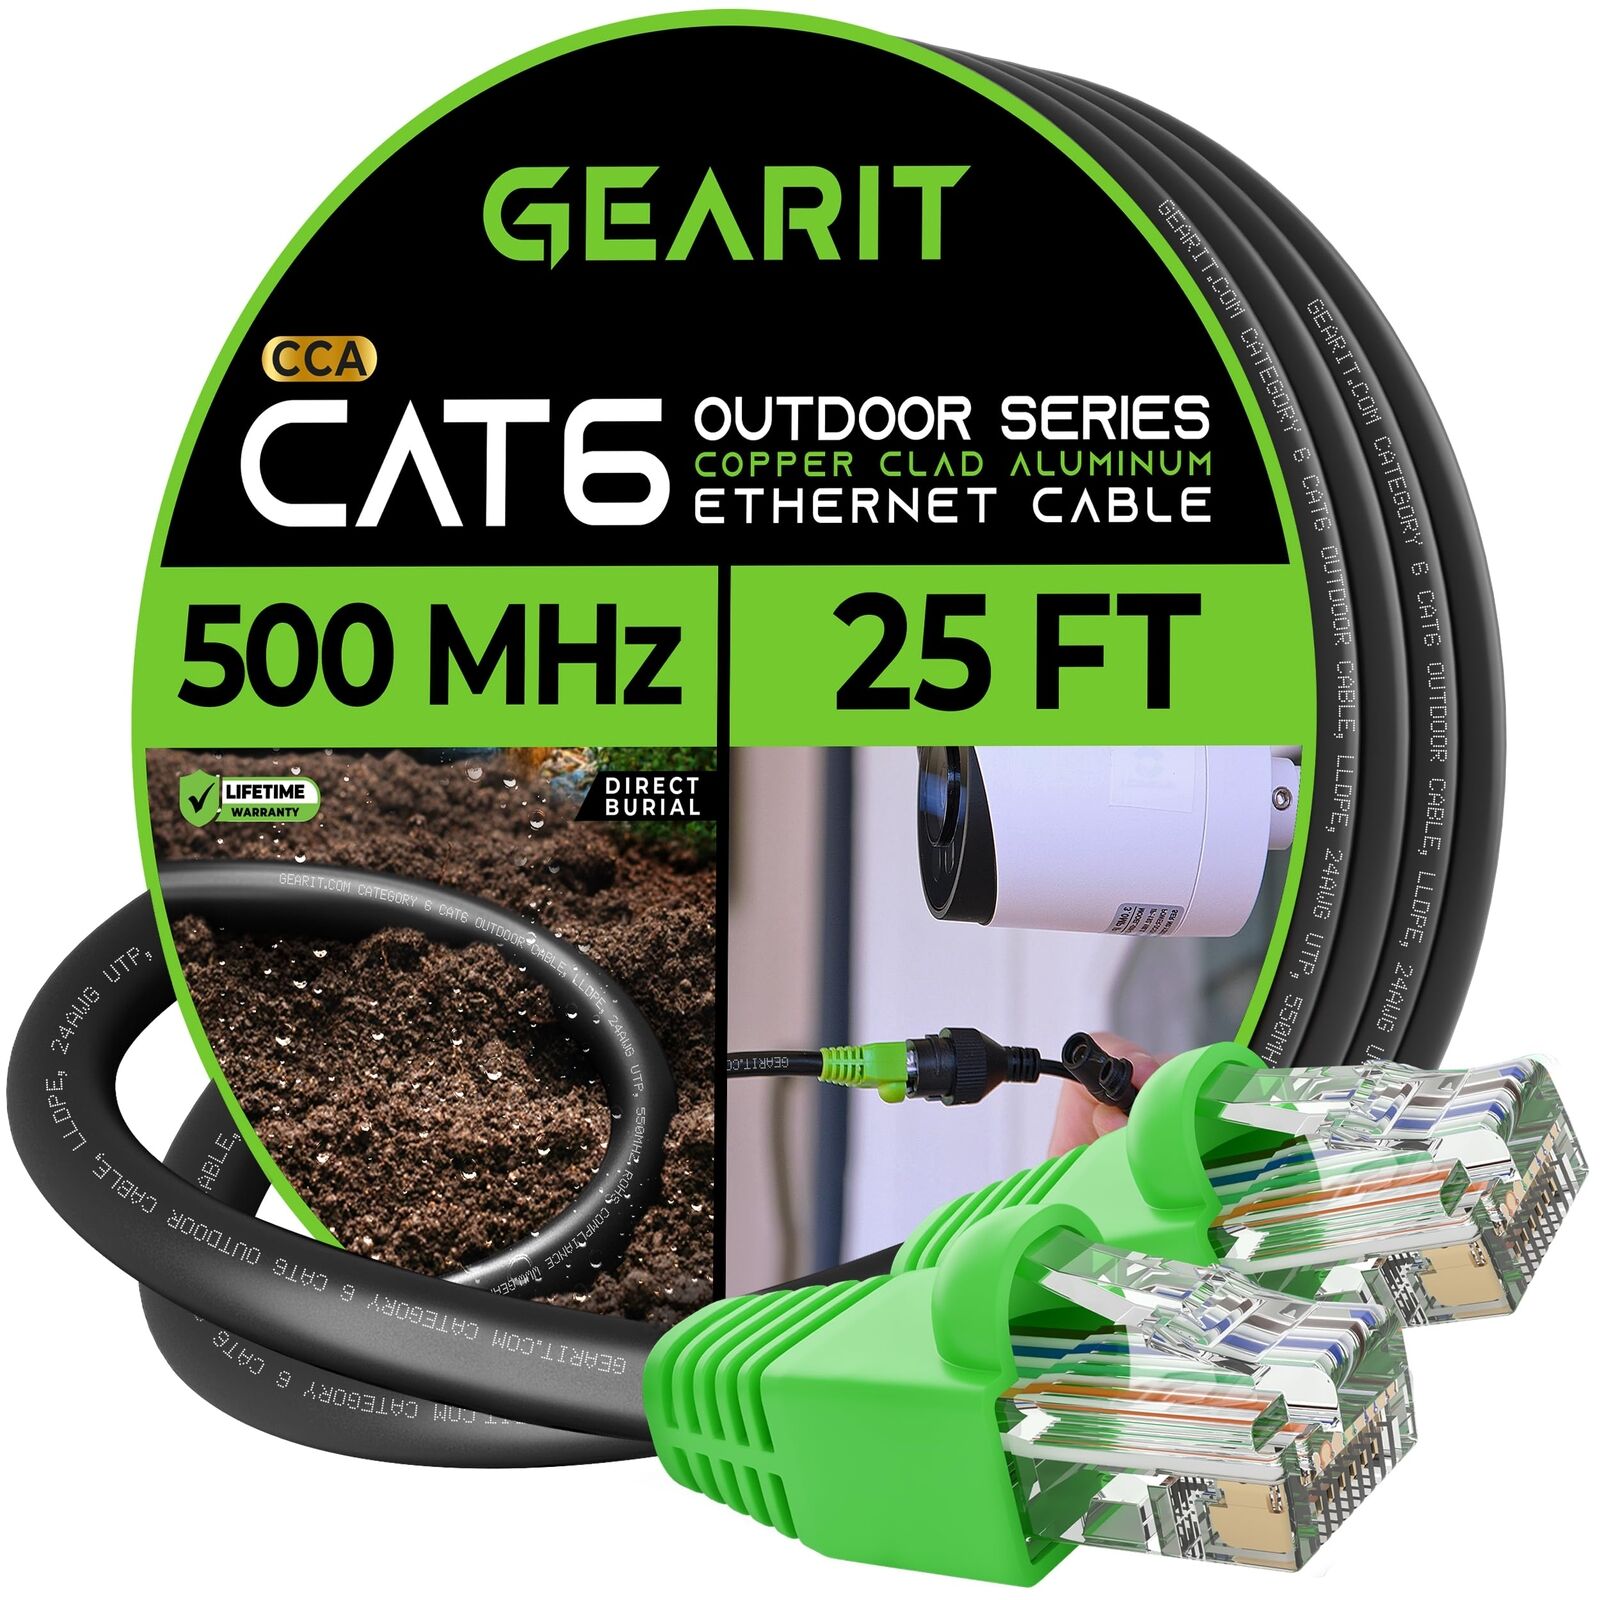 GearIT Cat6 Outdoor Ethernet Cable 25 Feet CCA Copper Clad, Waterproof, Direct -